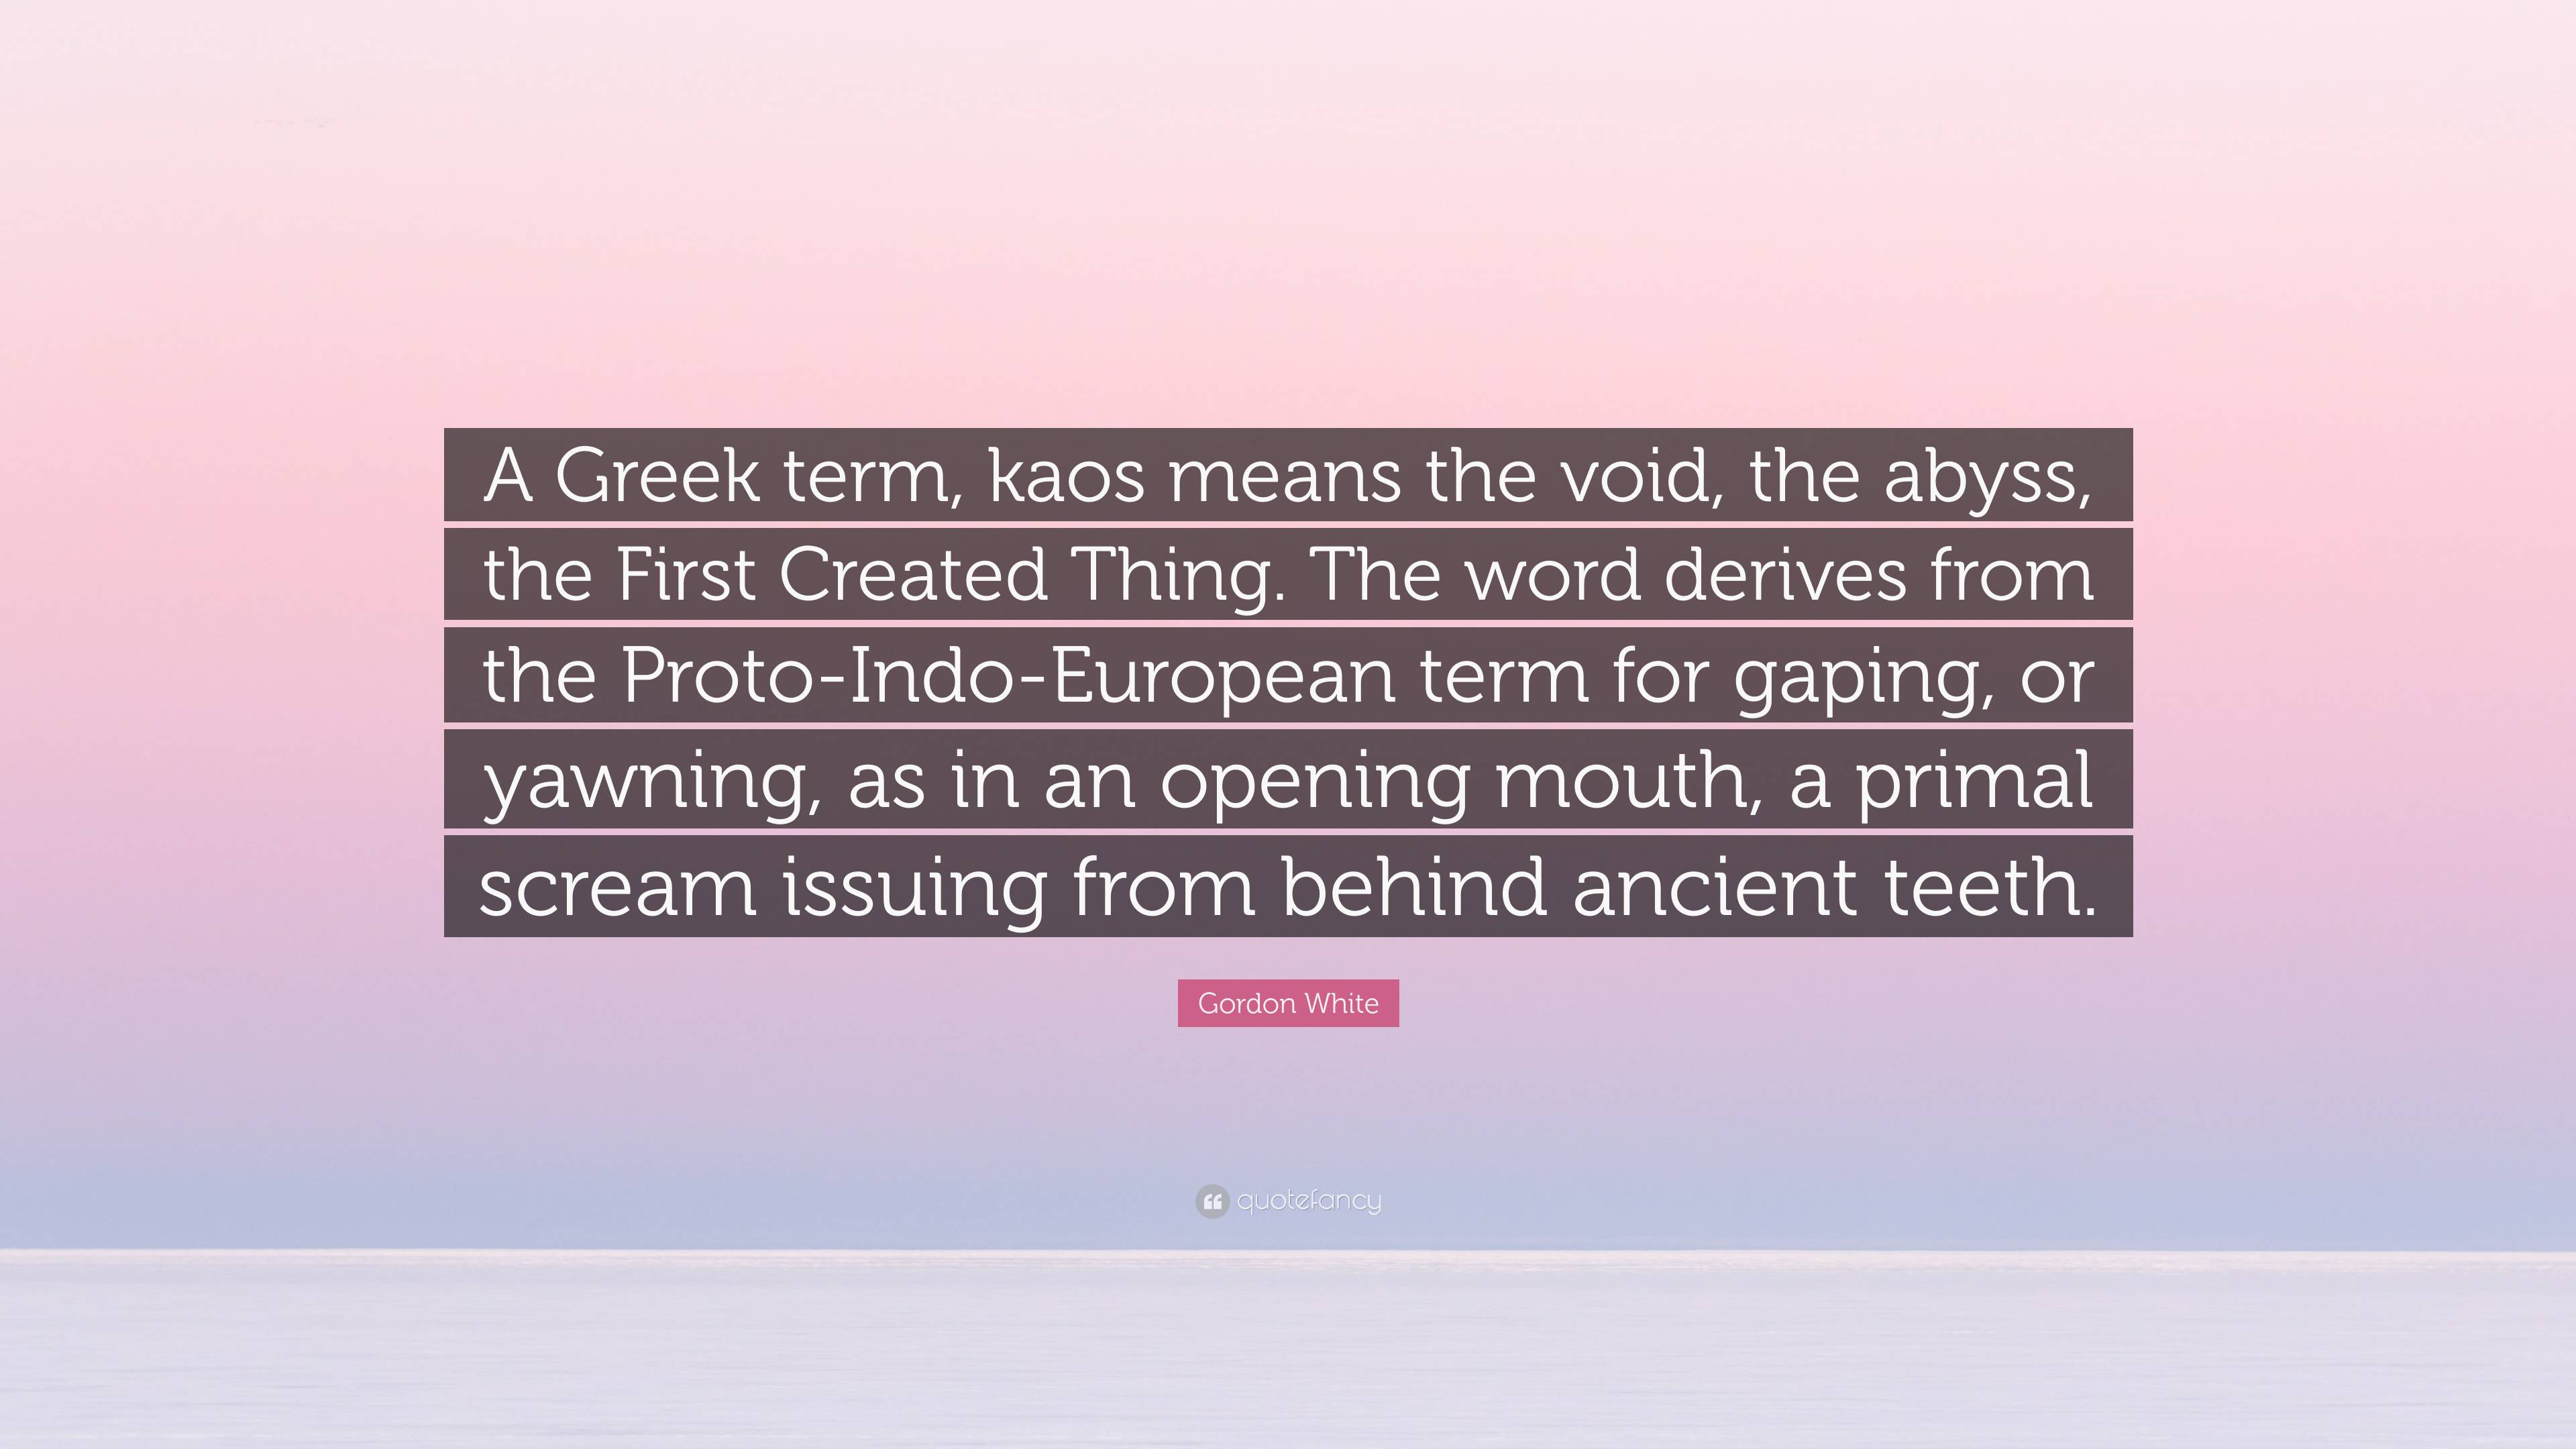 Gordon White Quote: “A Greek term, kaos means the void, the abyss, the  First Created Thing. The word derives from the Proto-Indo-European ter”